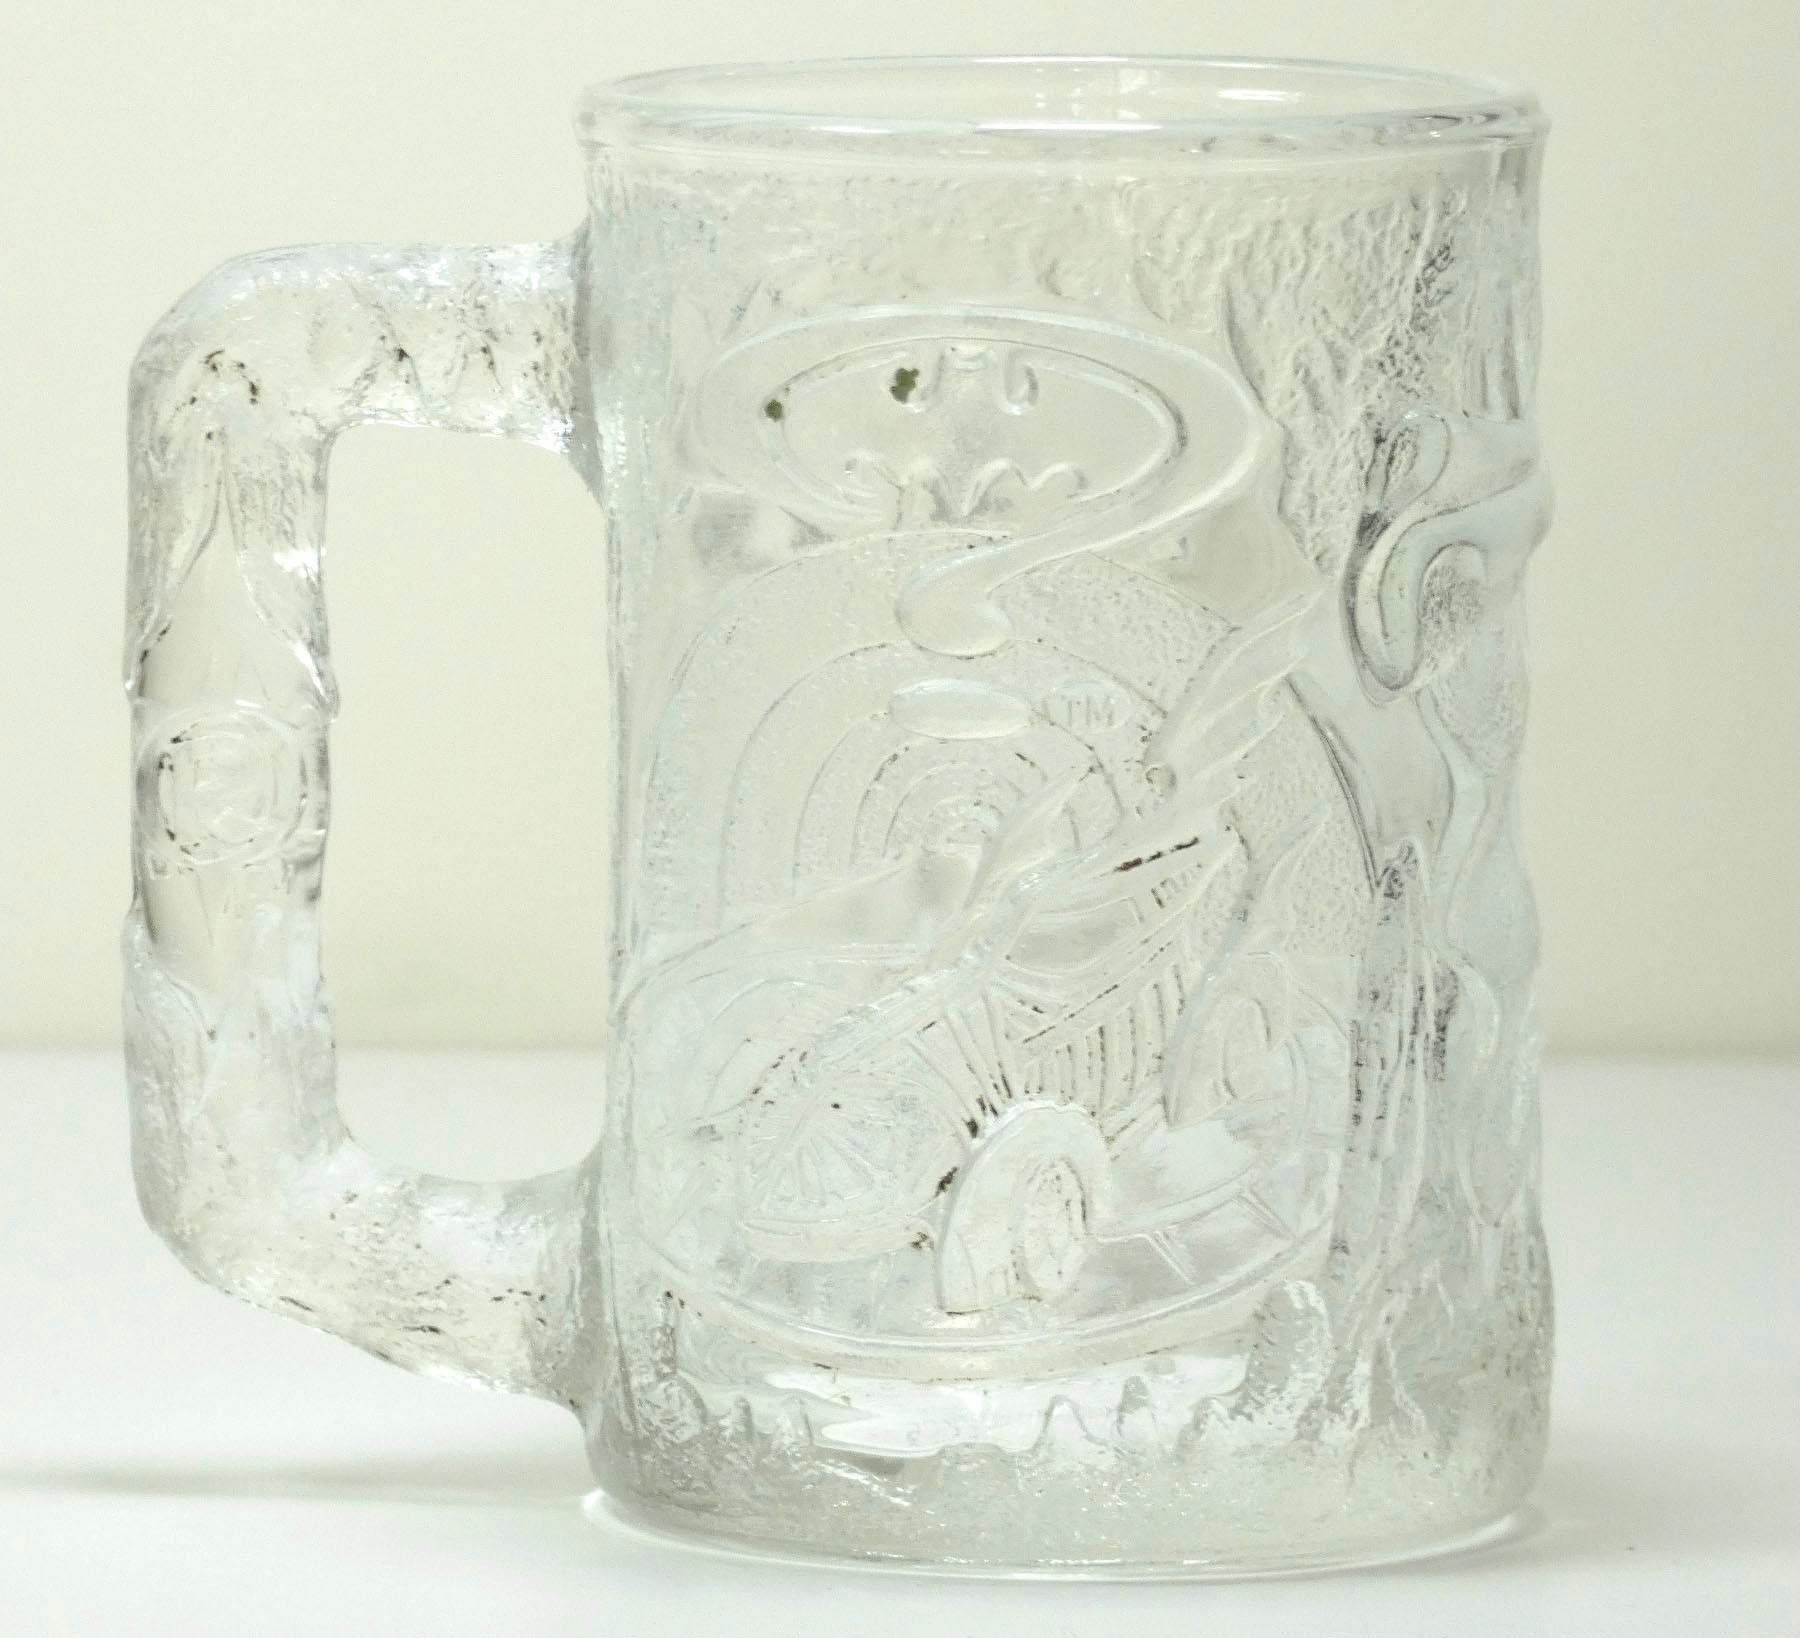 A set of four Batman Forever (1995) glass mugs, available to purchase from McDonalds stores to - Image 9 of 13